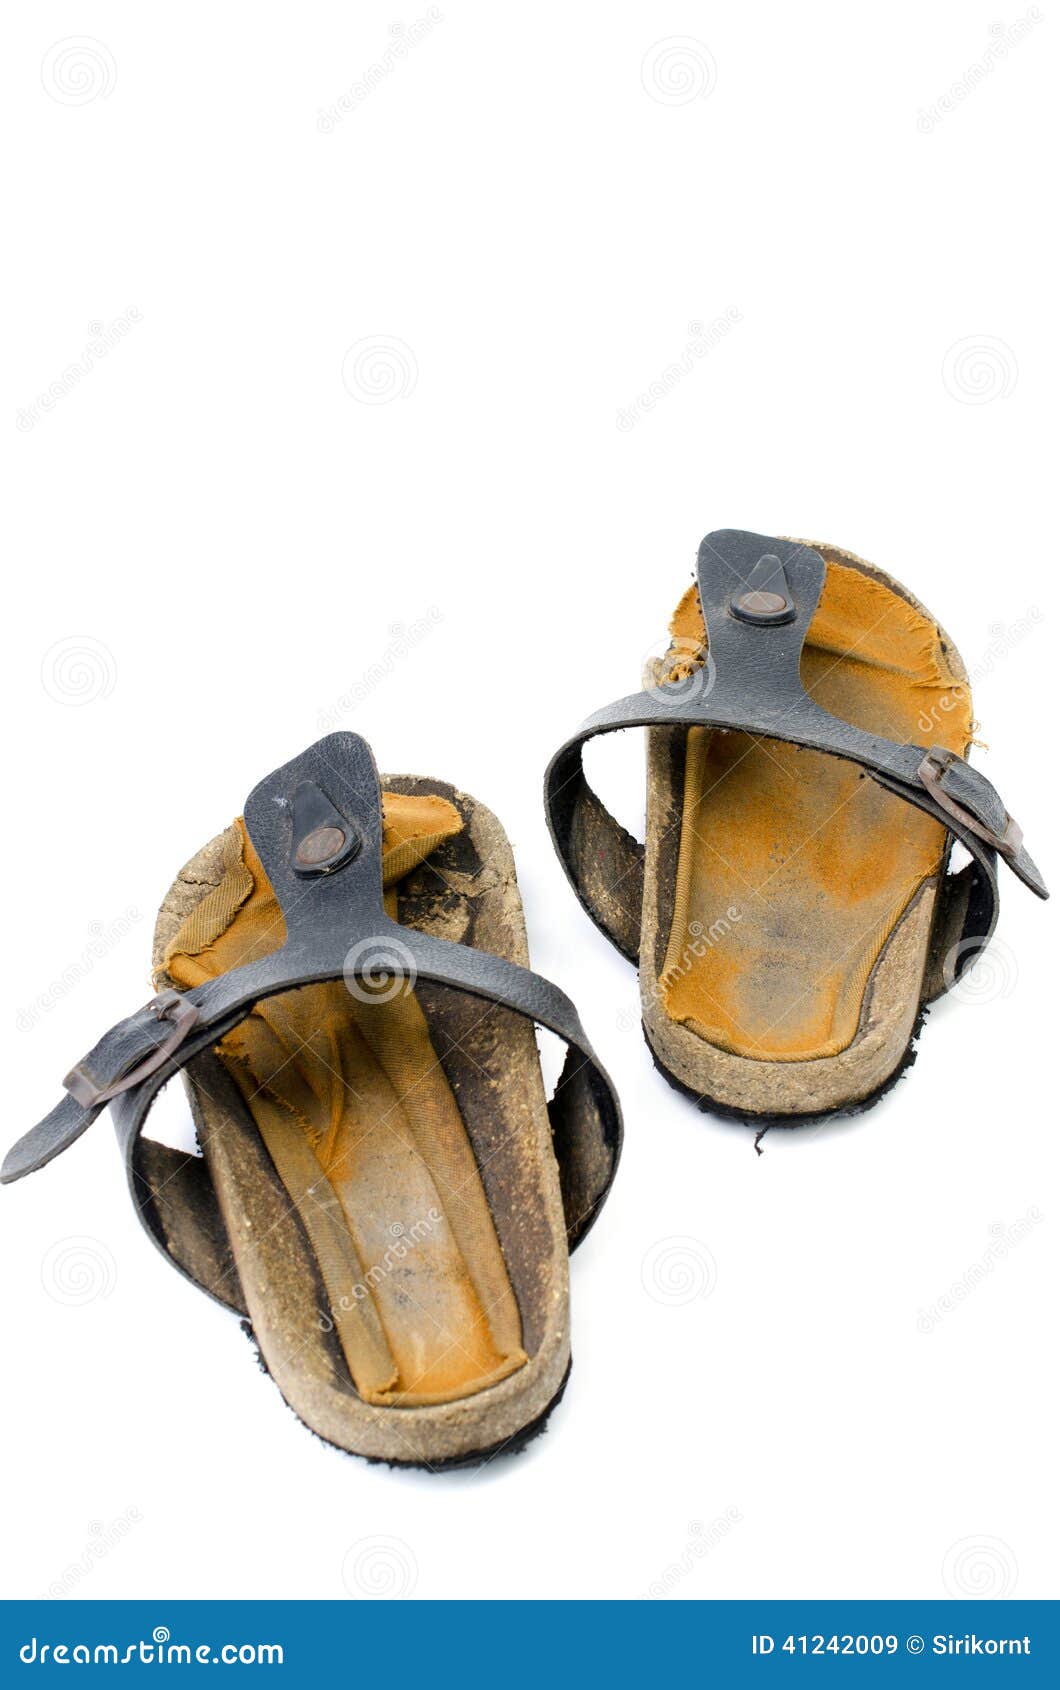 Old Sandals over white stock image. Image of flipflops - 41242009